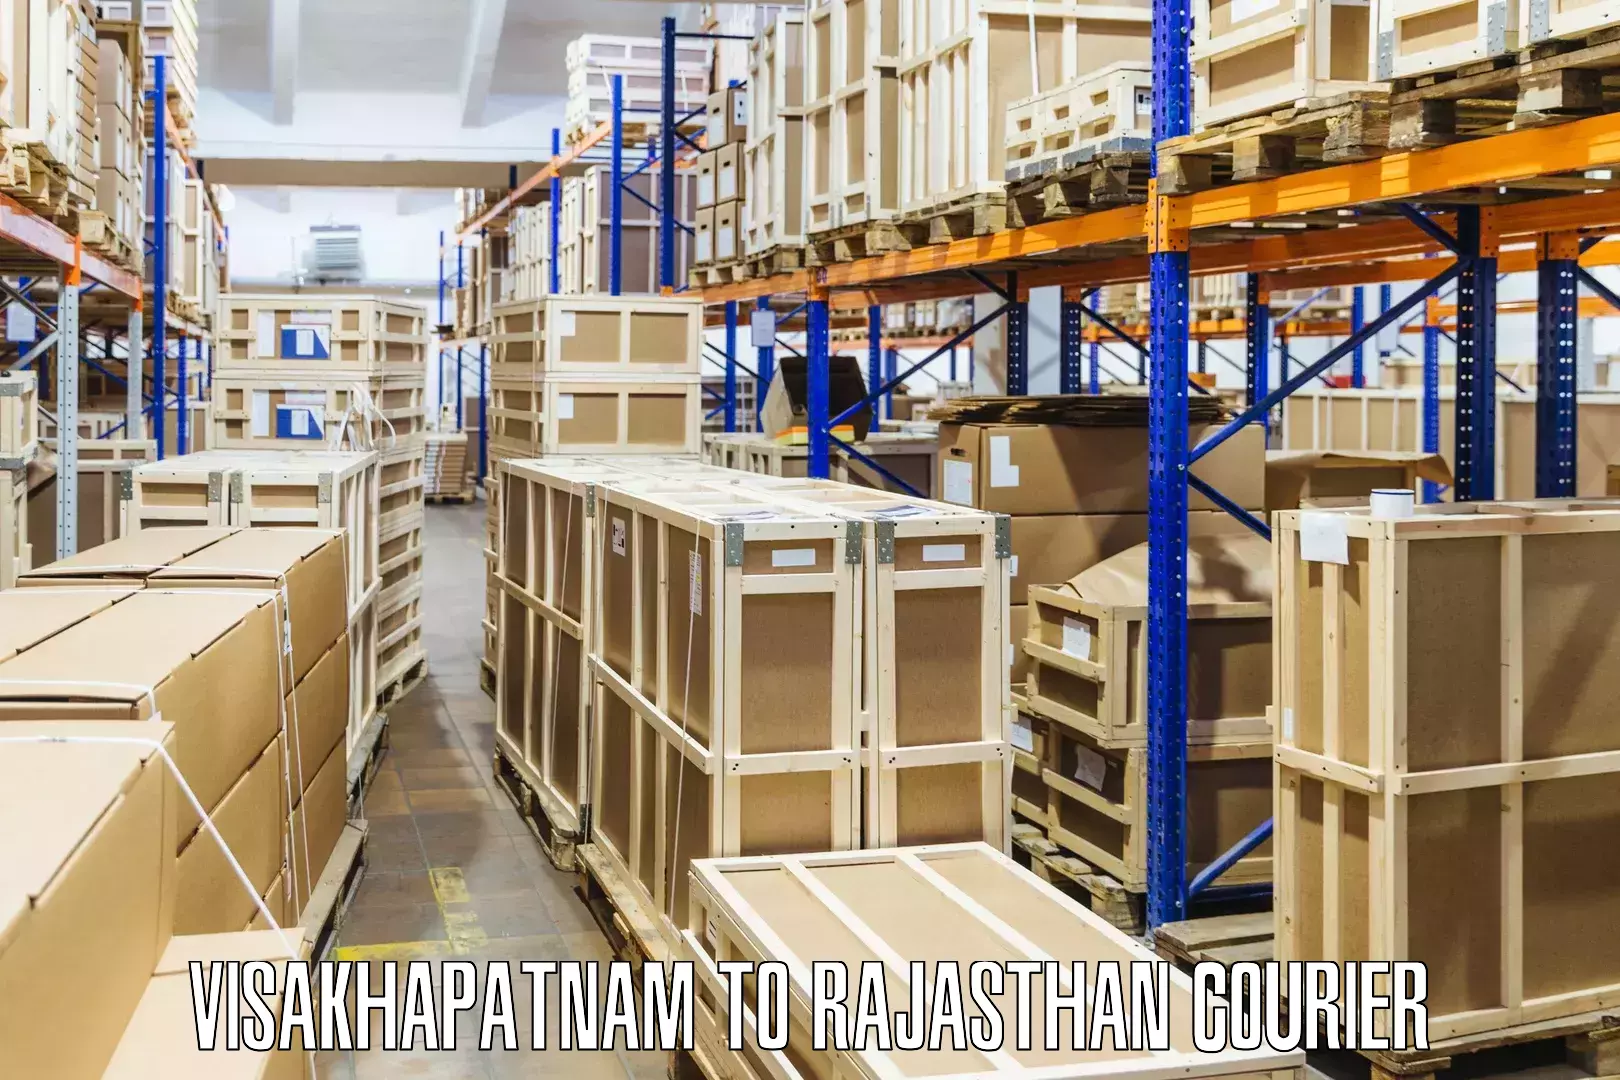 Pharmaceutical courier Visakhapatnam to Rajasthan